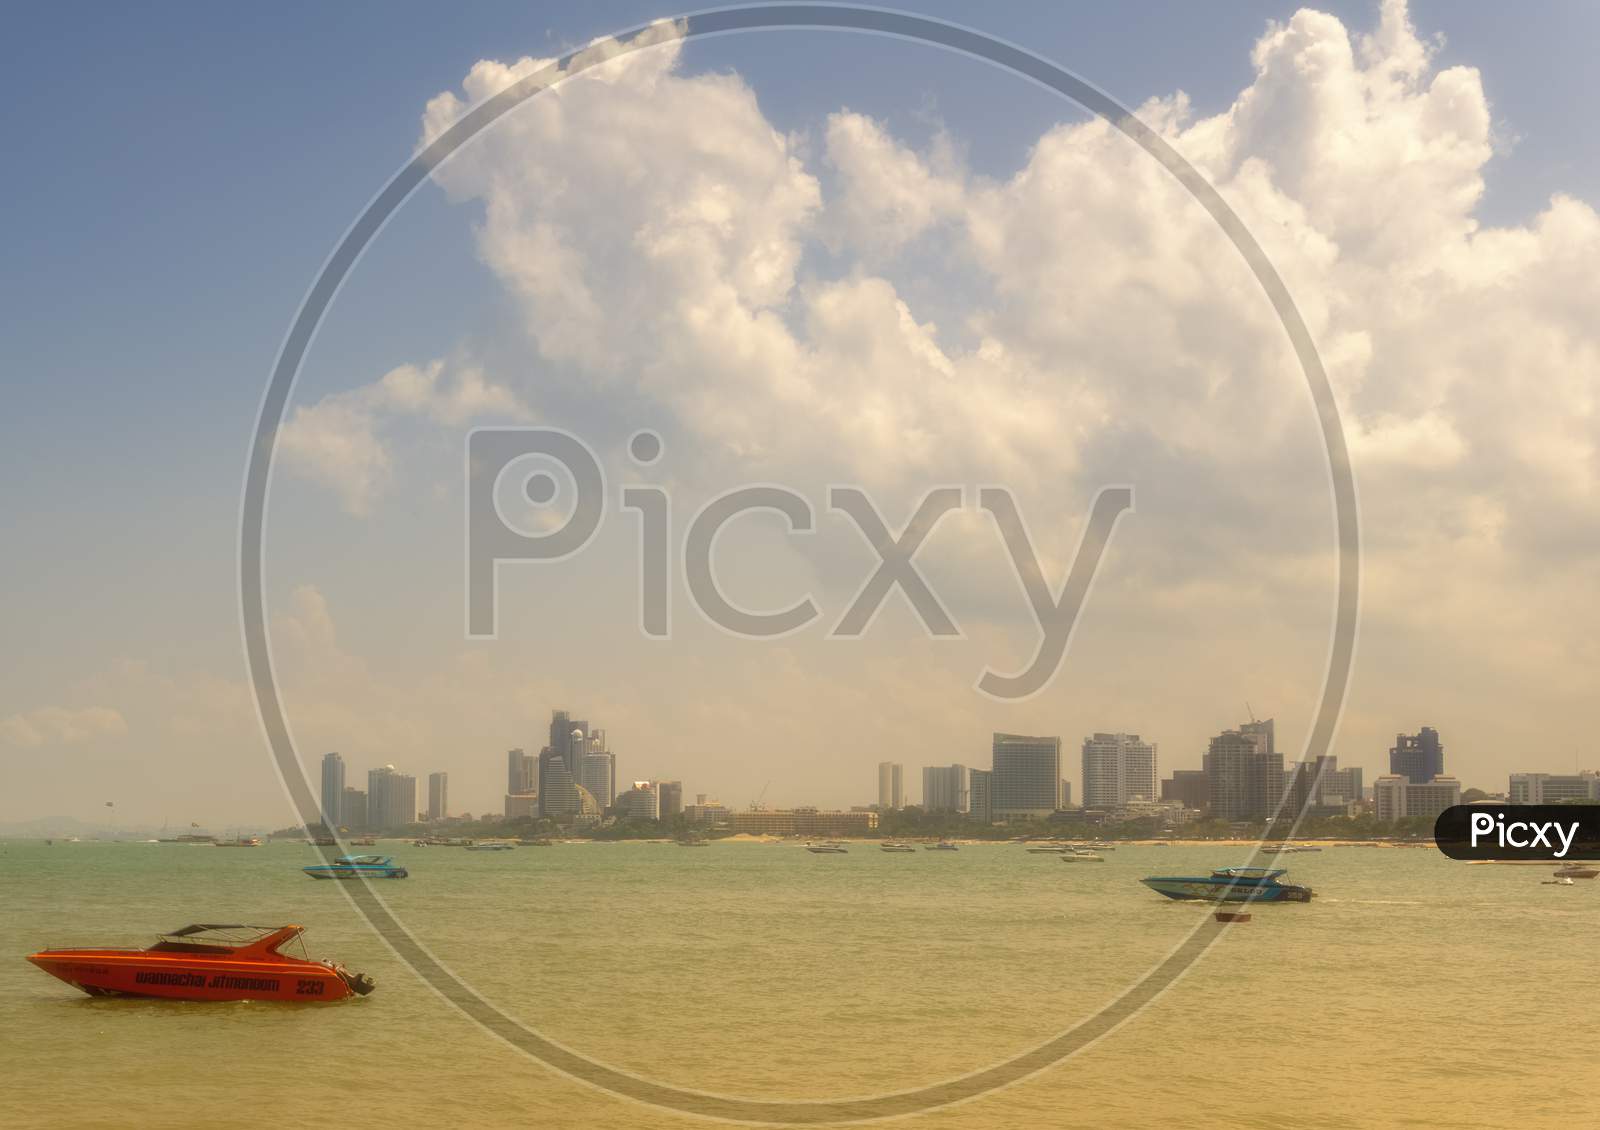 Pattaya,Thailand - April 20,2018: The Beach Tourists Relax And Swim There And Rent Boats For Trips.Some Thai People Sell Souvenirs,Food And Drinks To Them.